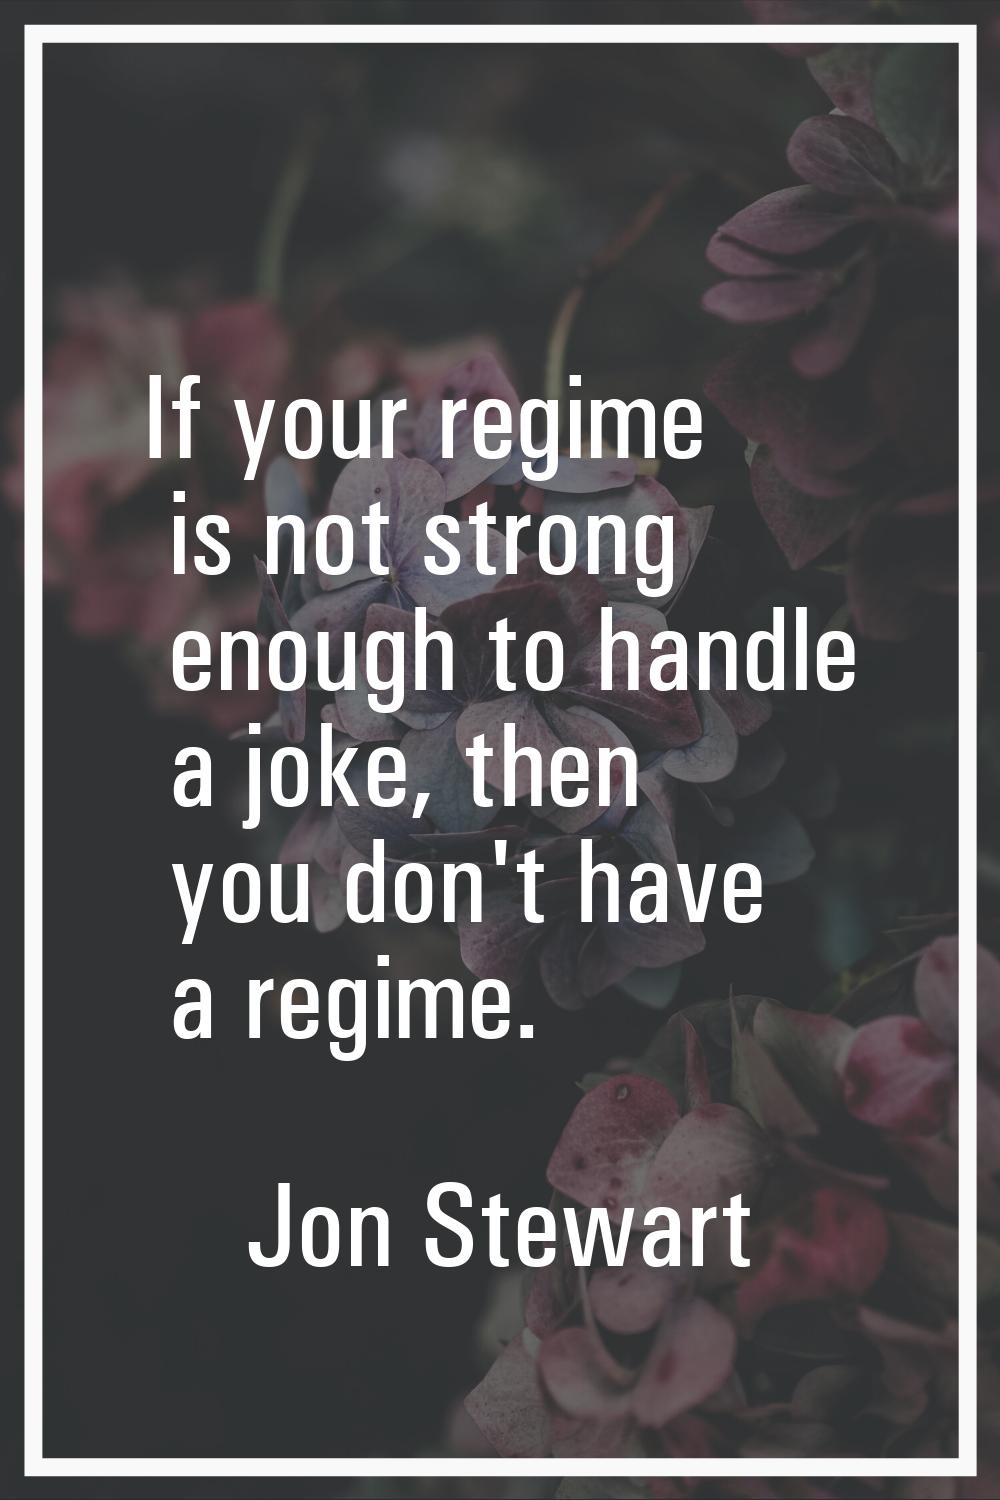 If your regime is not strong enough to handle a joke, then you don't have a regime.